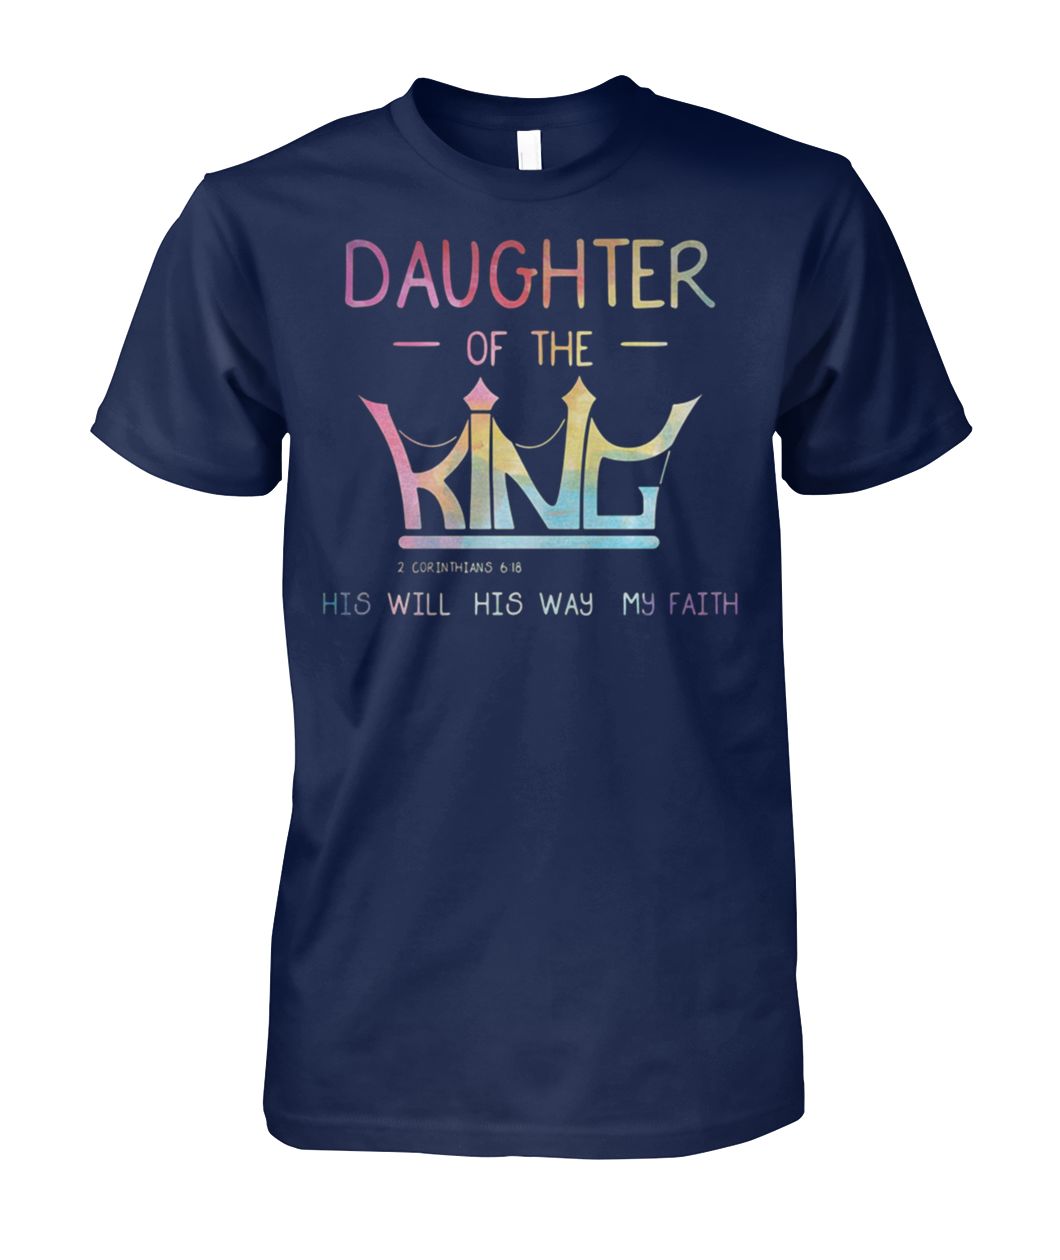 Daughter of the king 2 corinthians 6 18 his will his way my faith shirt ...